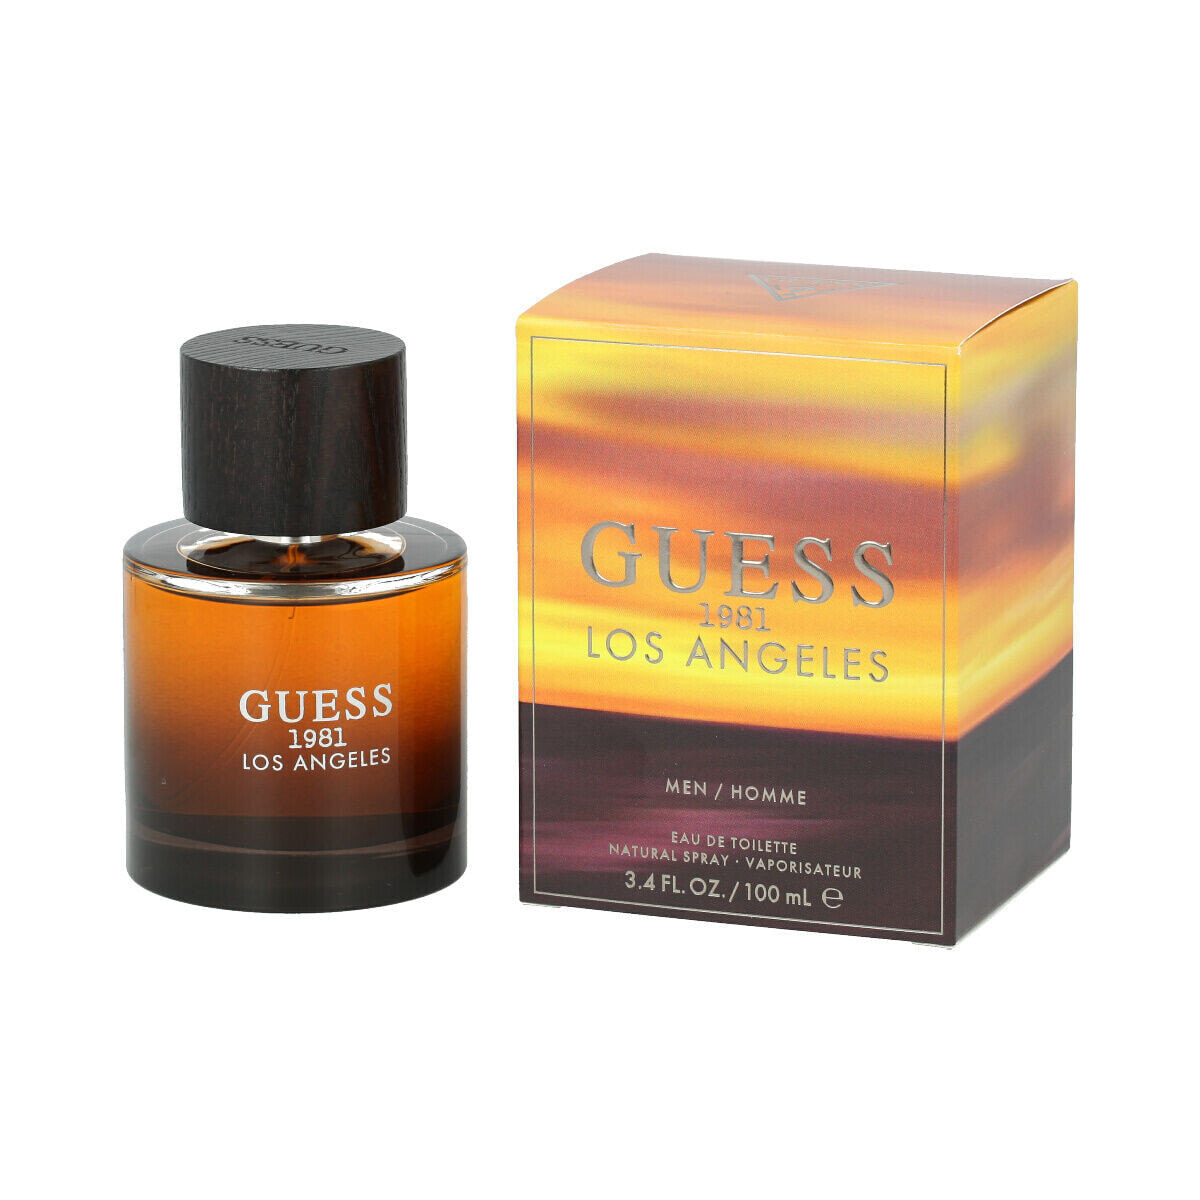 Men's Perfume Guess EDT Guess 1981 Los Angeles For Men 100 ml